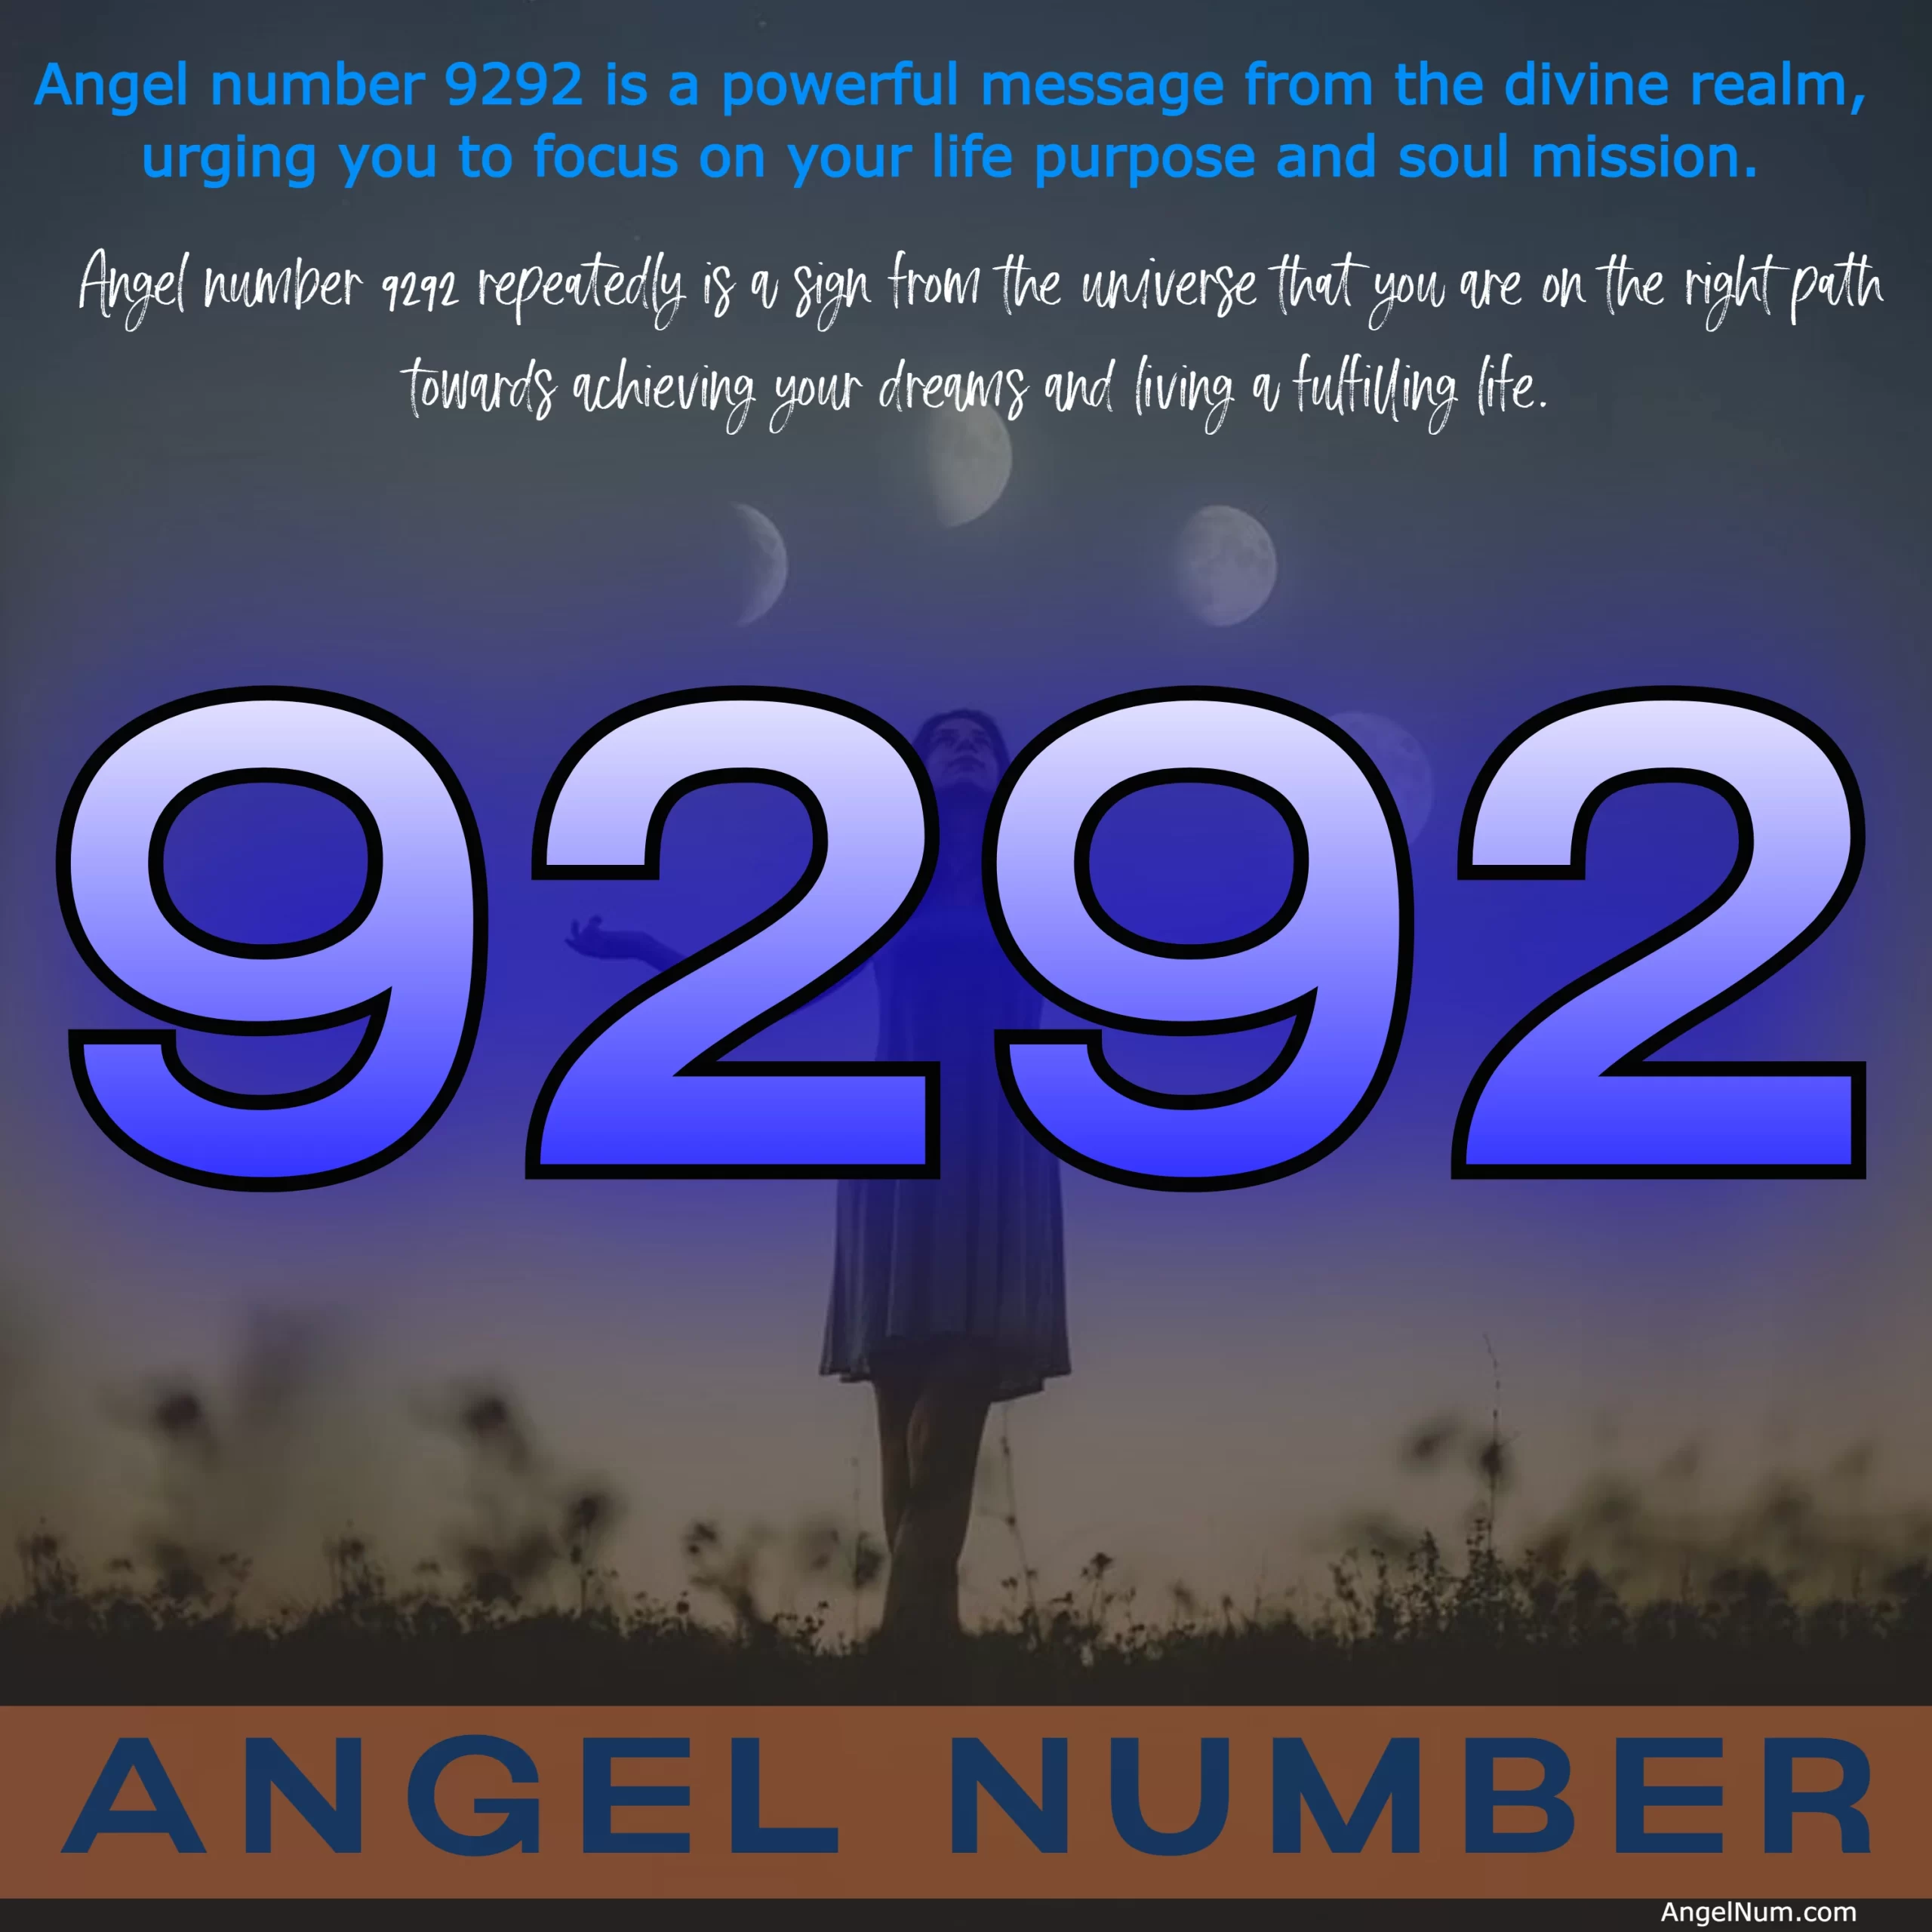 Angel Number 9292: Meaning, Symbolism, and Significance